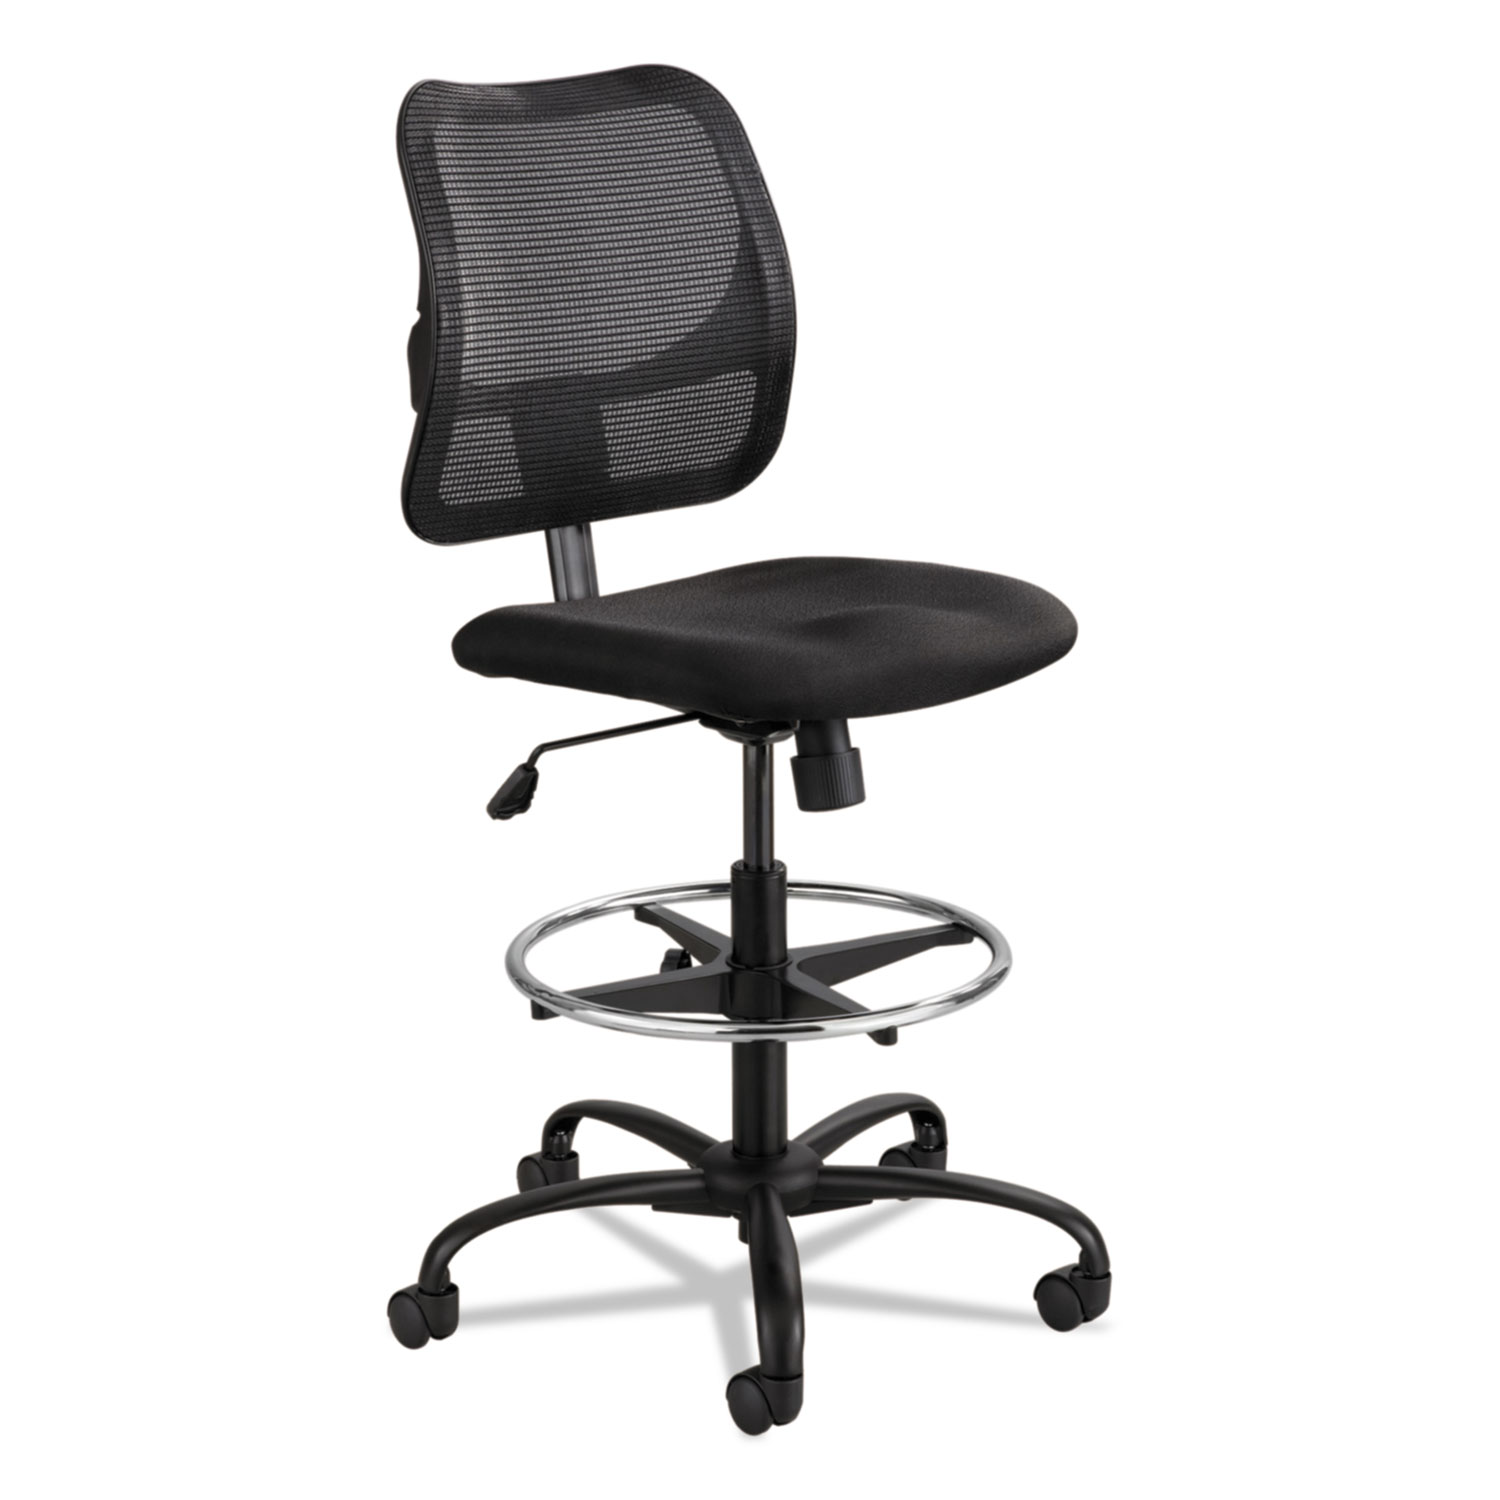  Safco 3395BL Vue Series Mesh Extended-Height Chair, 33 Seat Height, Supports up to 250 lbs., Black Seat/Black Back, Black Base (SAF3395BL) 